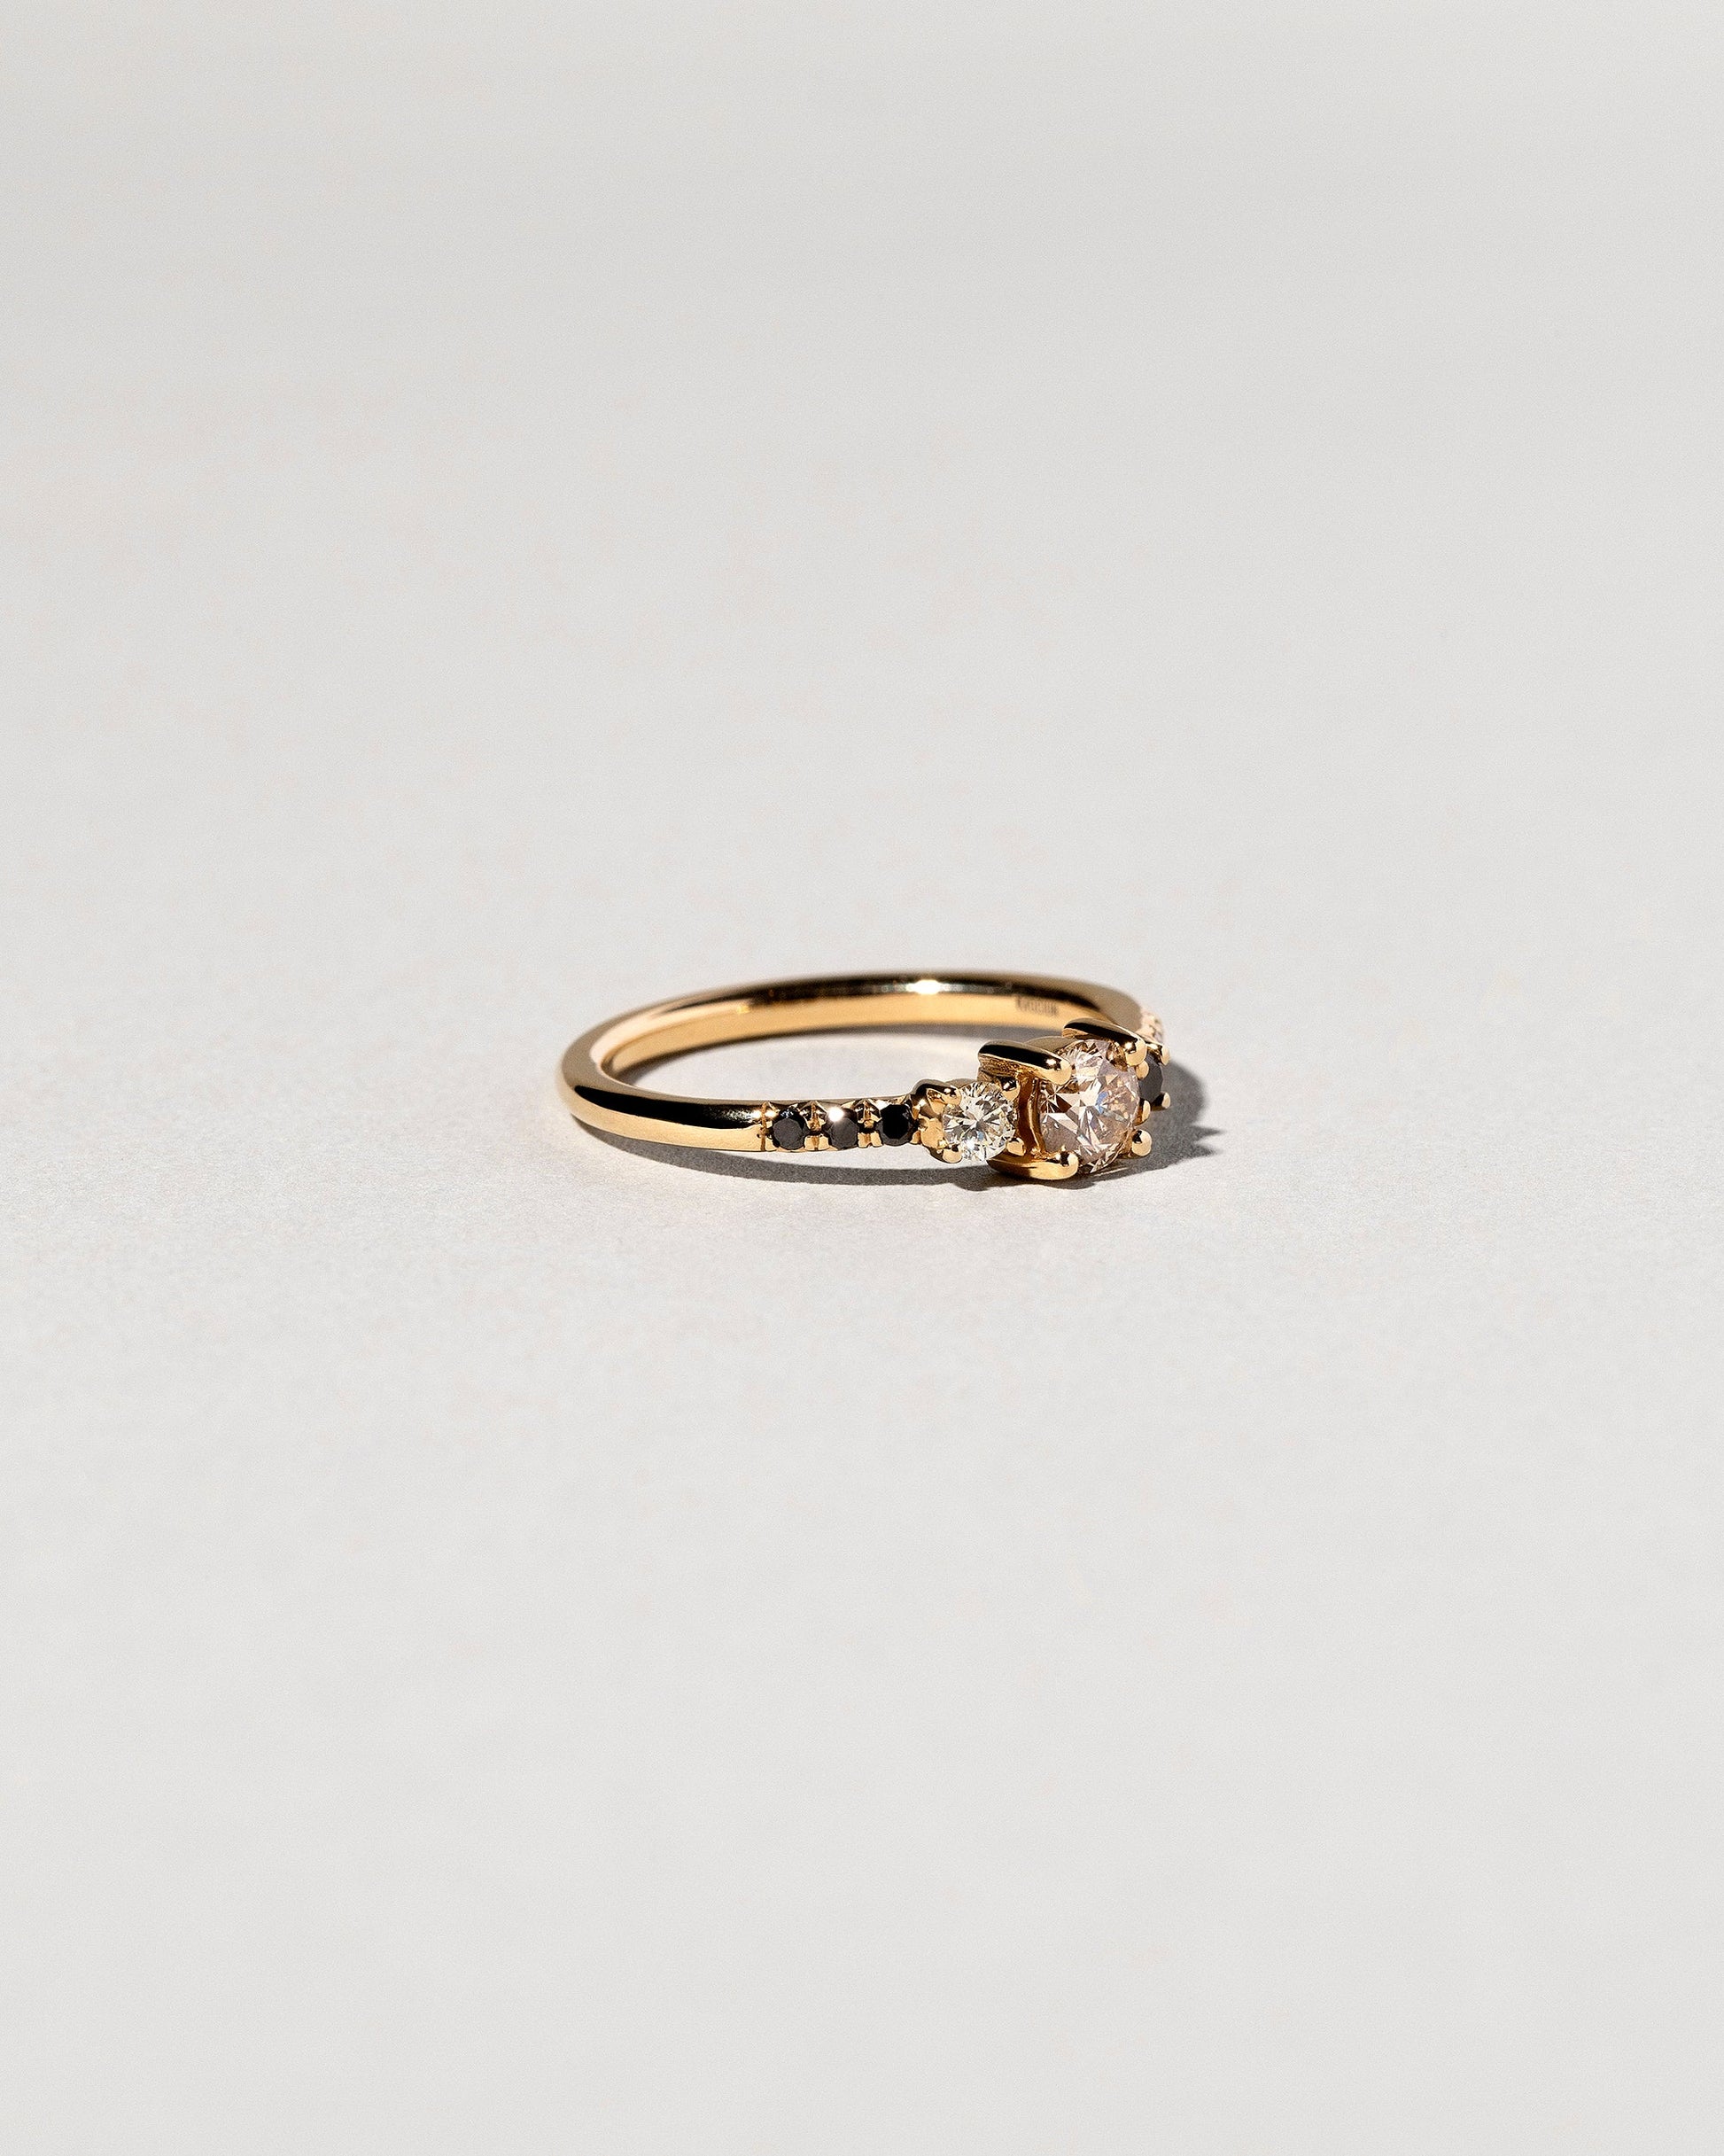  Patira Ring - Champagne Diamond on light color background.